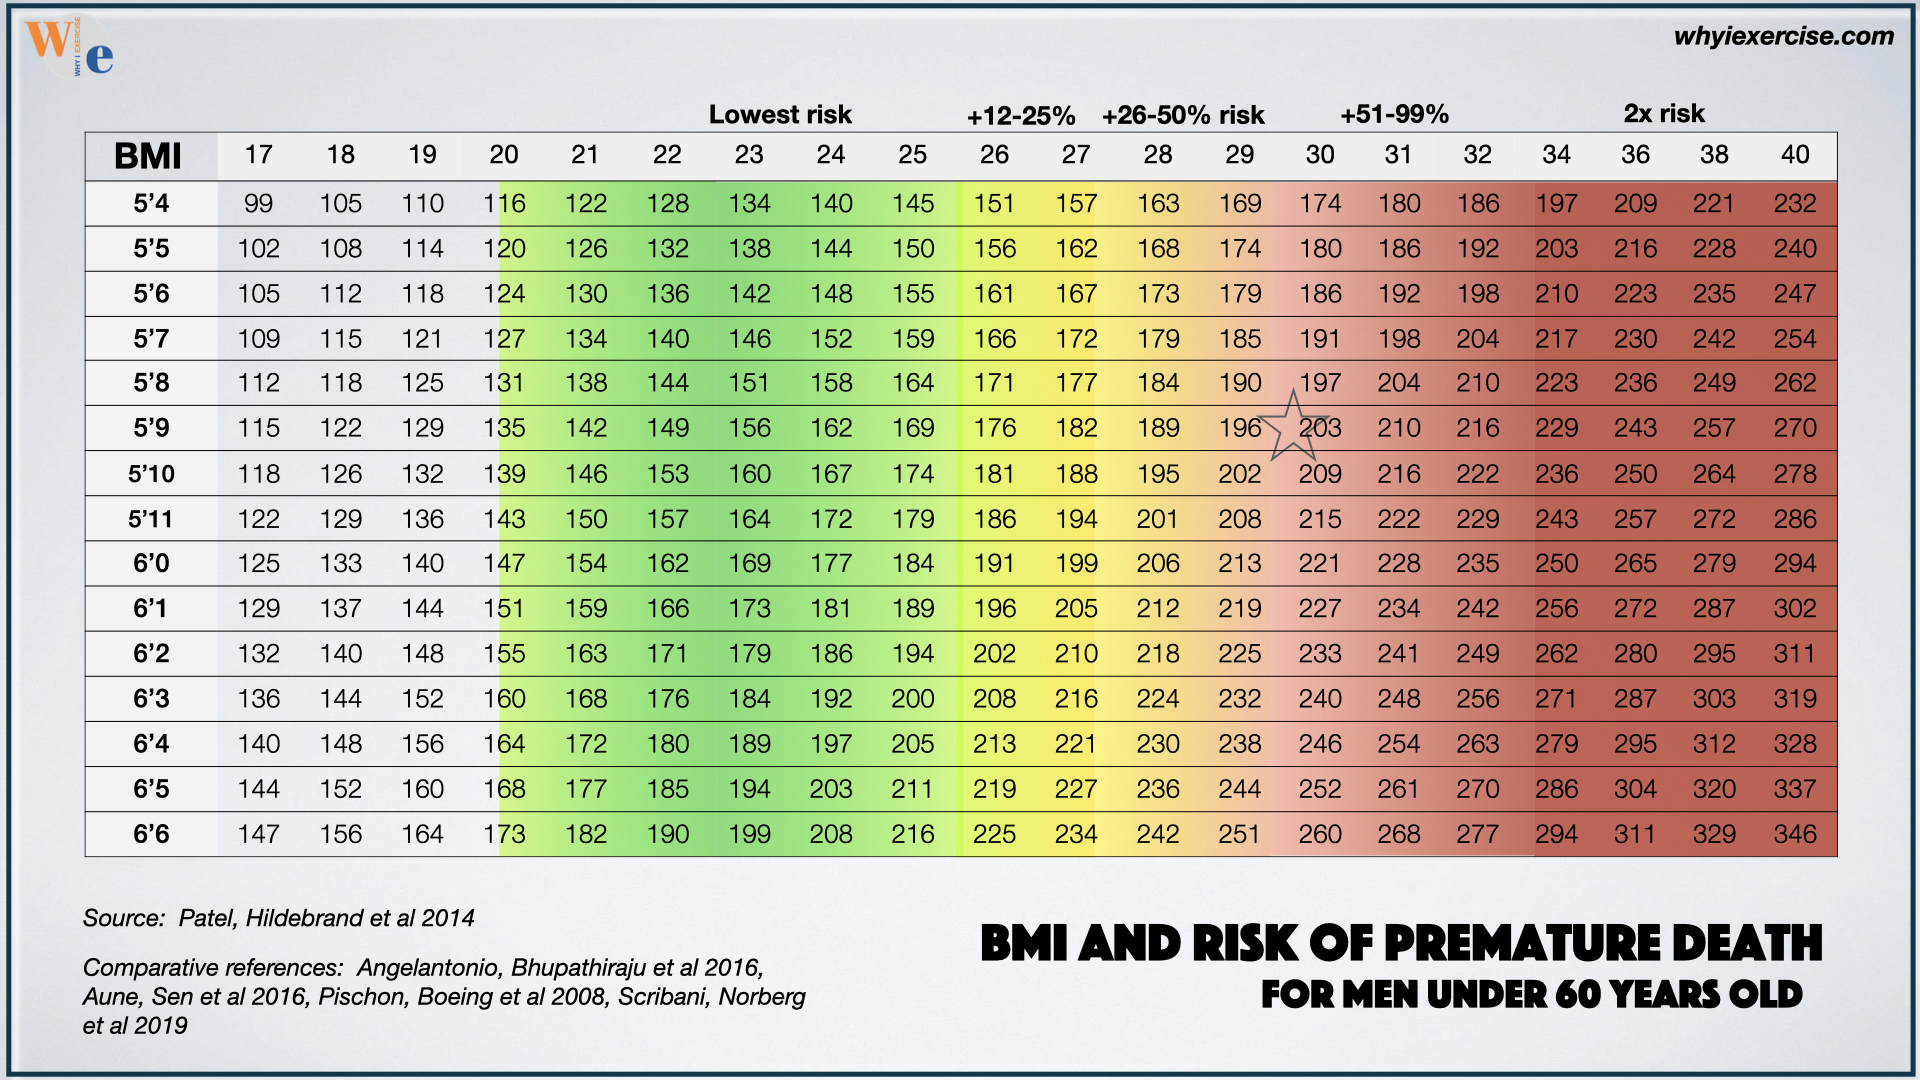 body mass index, BMI, and risk of premature death for men under age 60